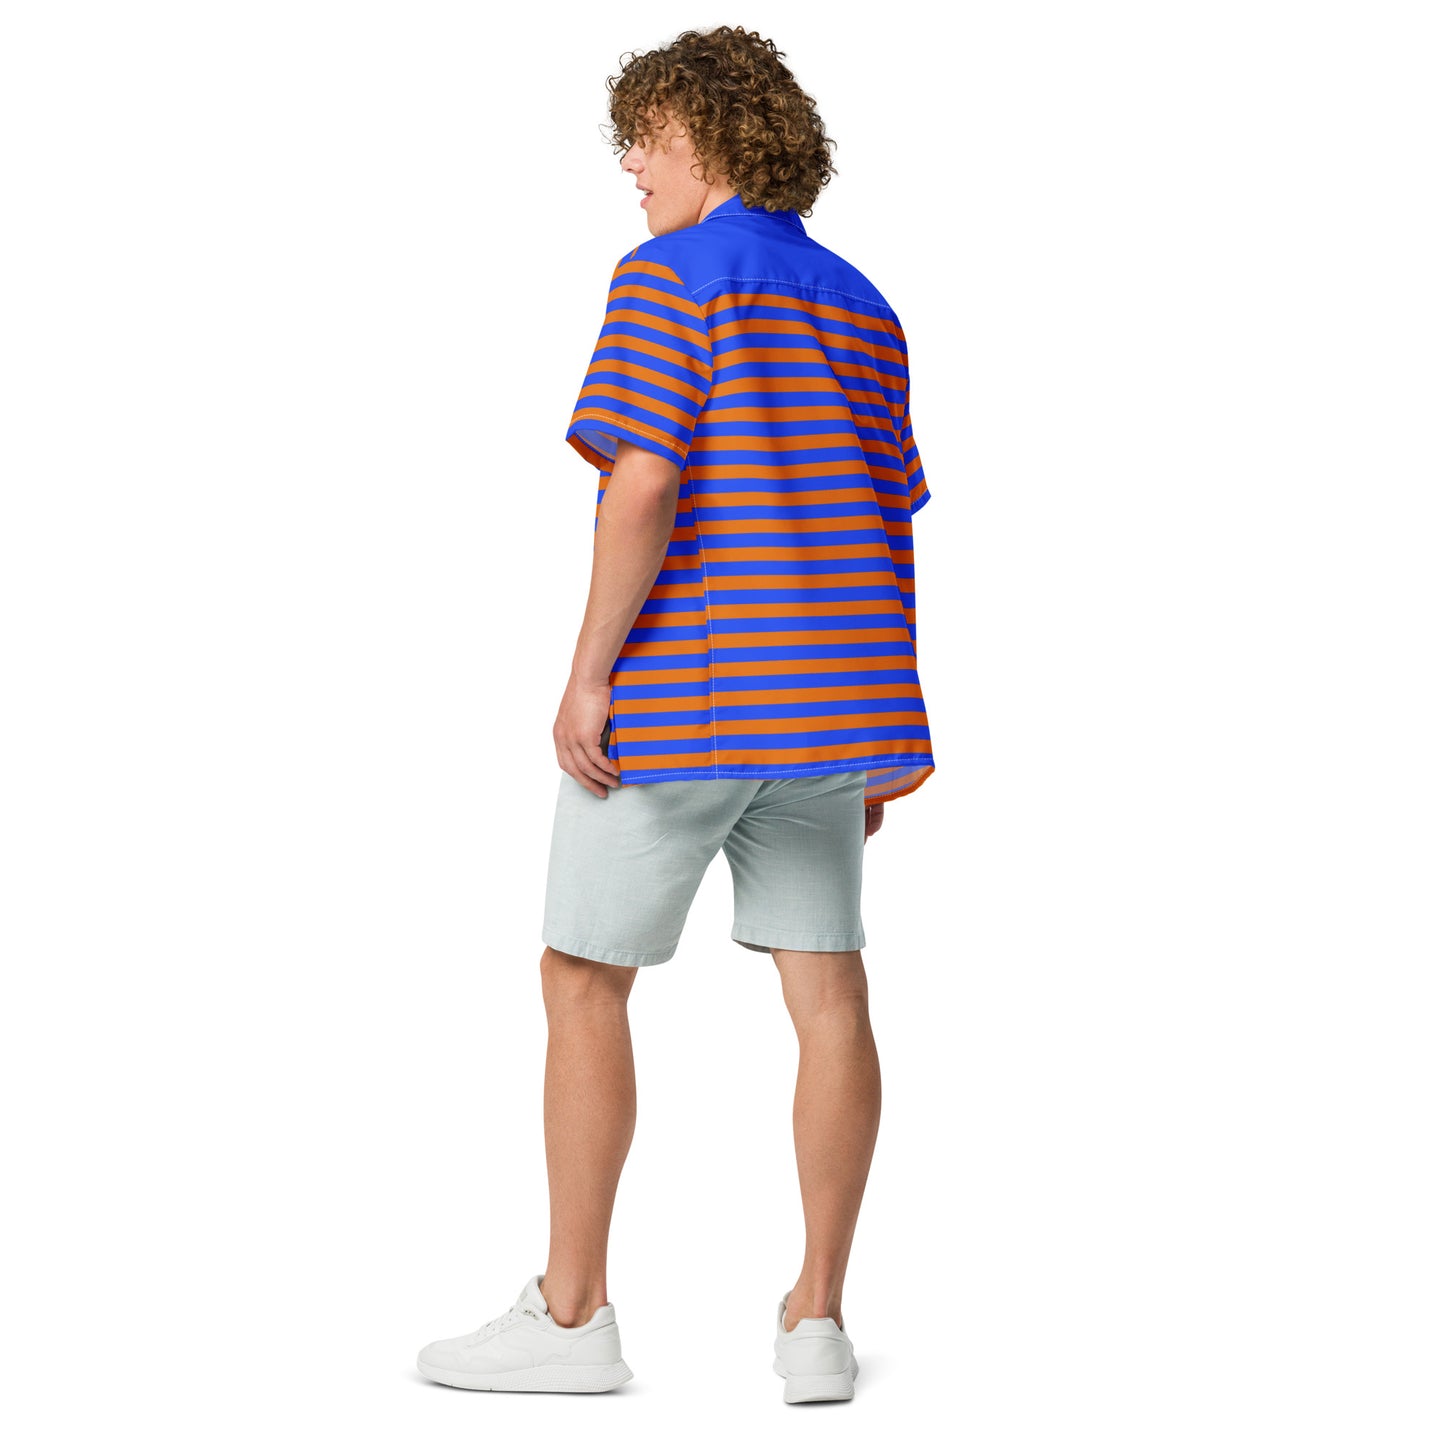 Stay fashionable with this blue and orange striped button-up shirt, perfect for any occasion.